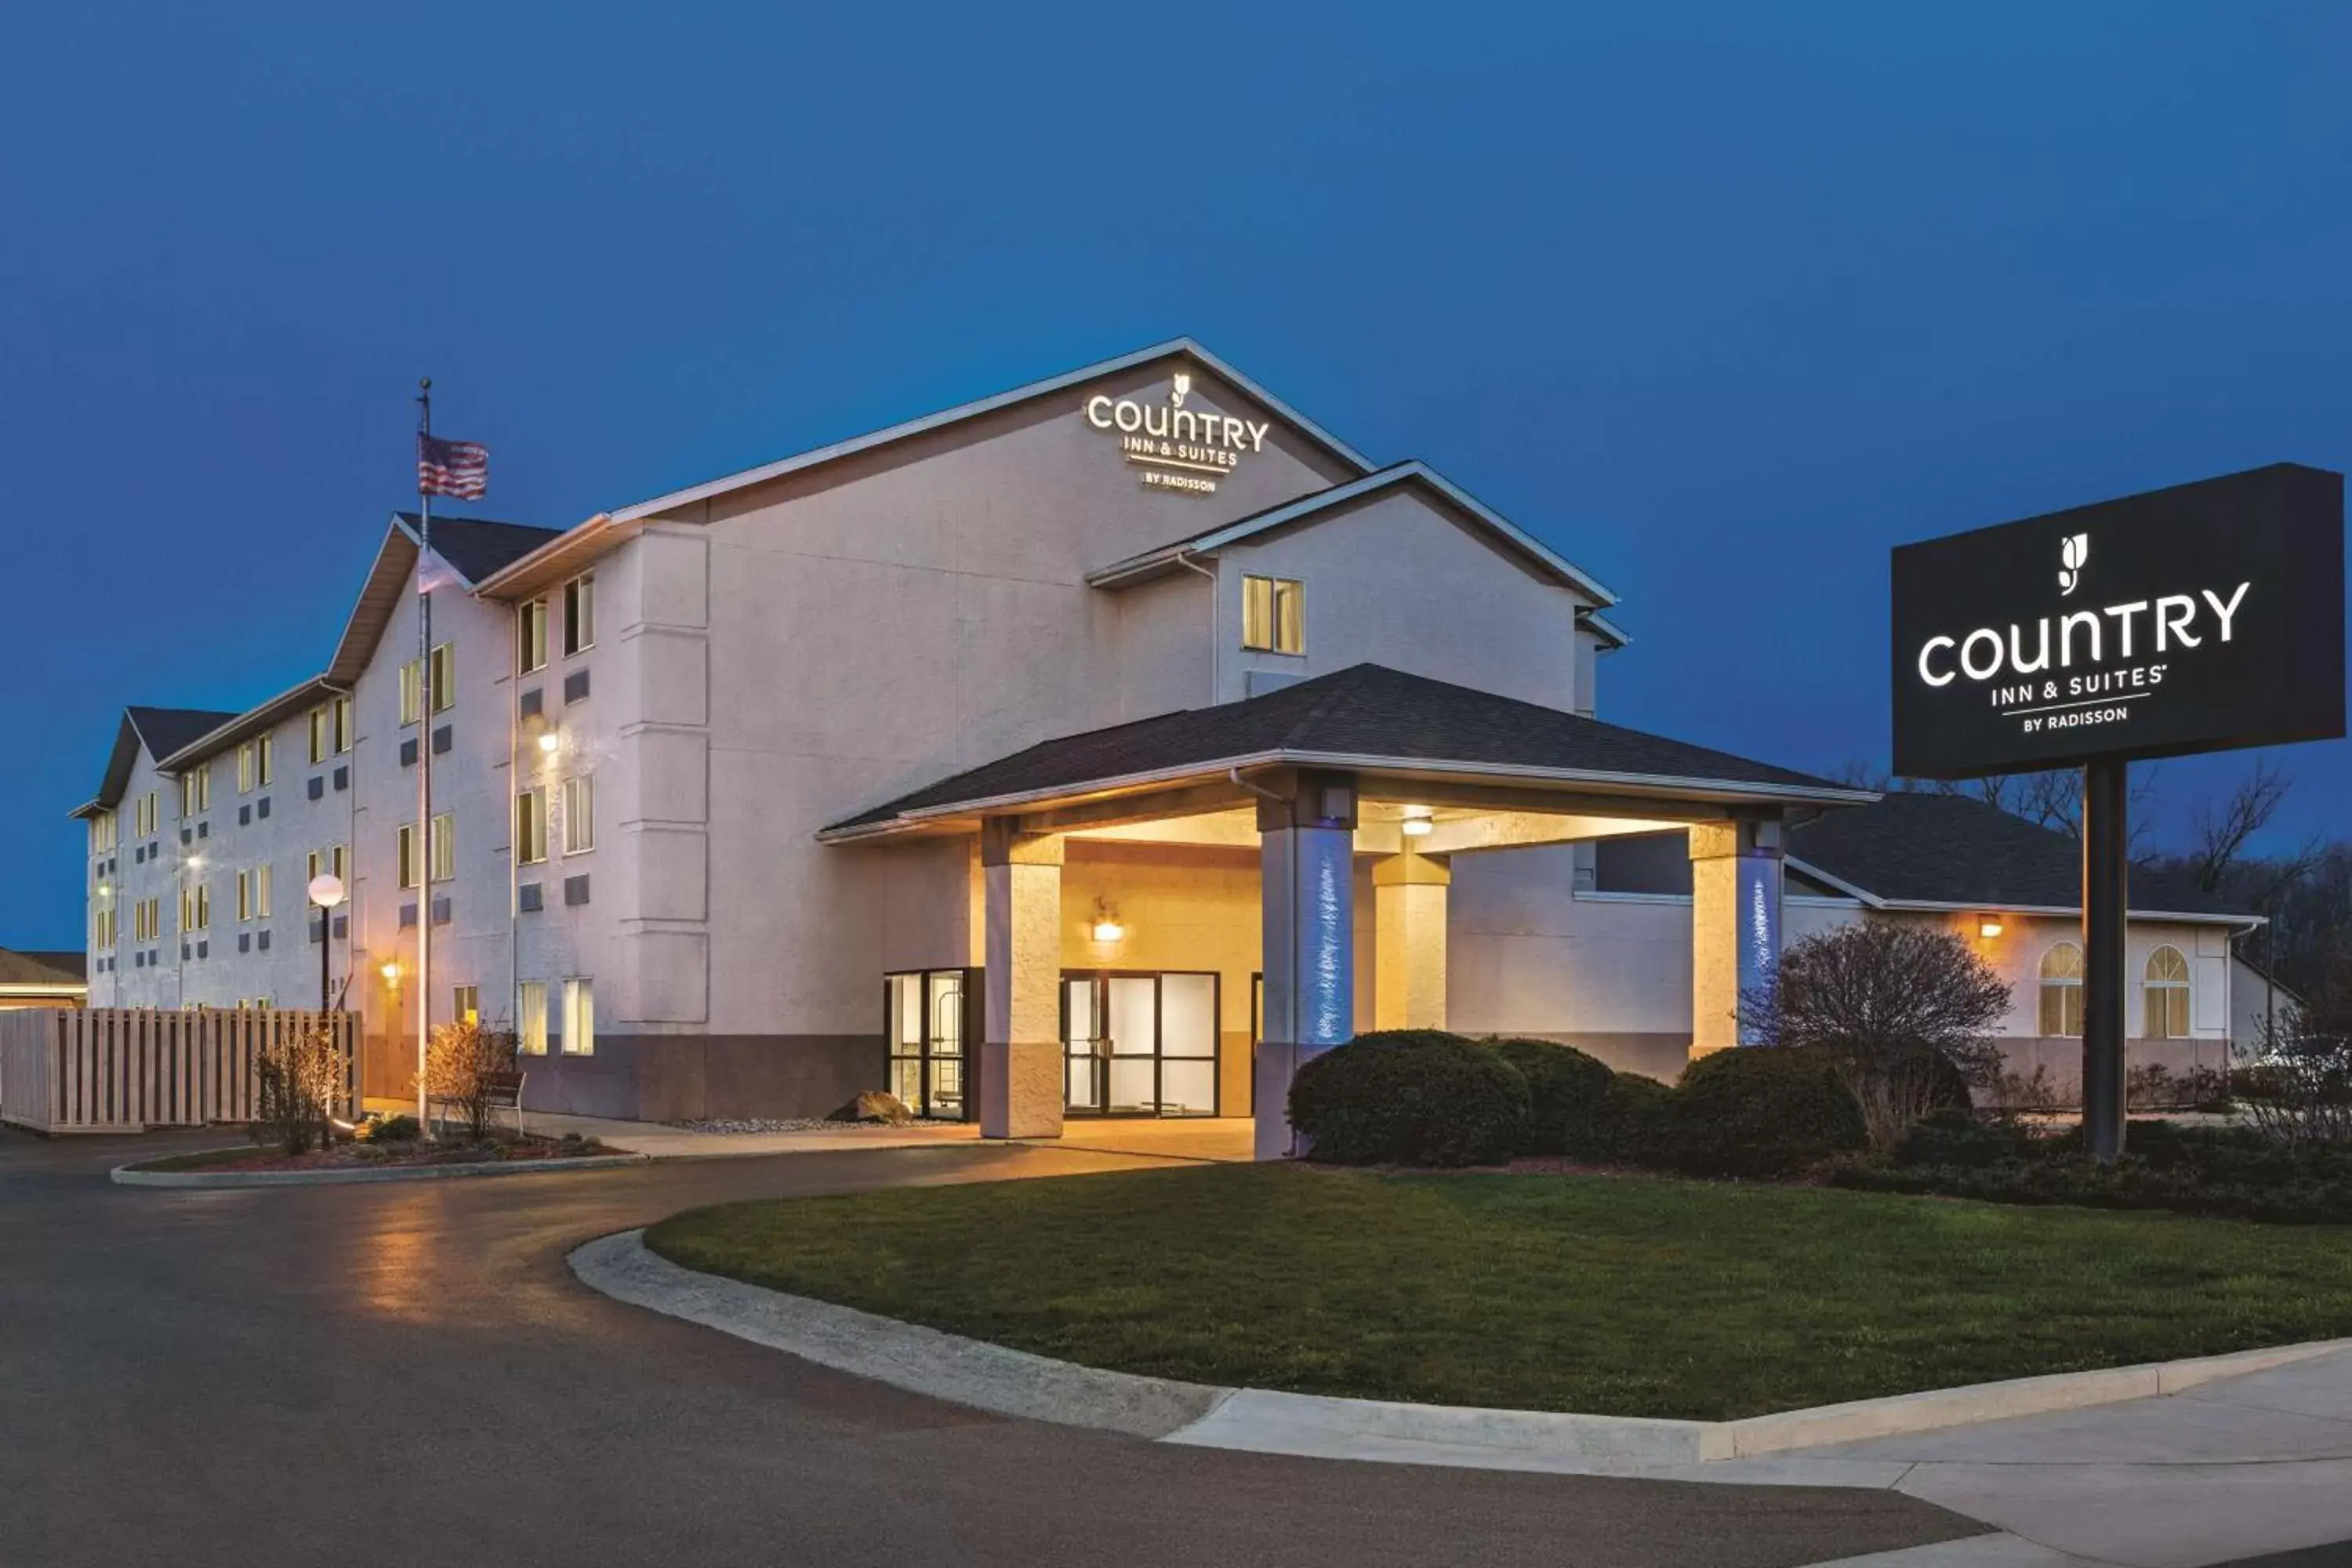 Property Building in Country Inn & Suites by Radisson, Auburn, IN